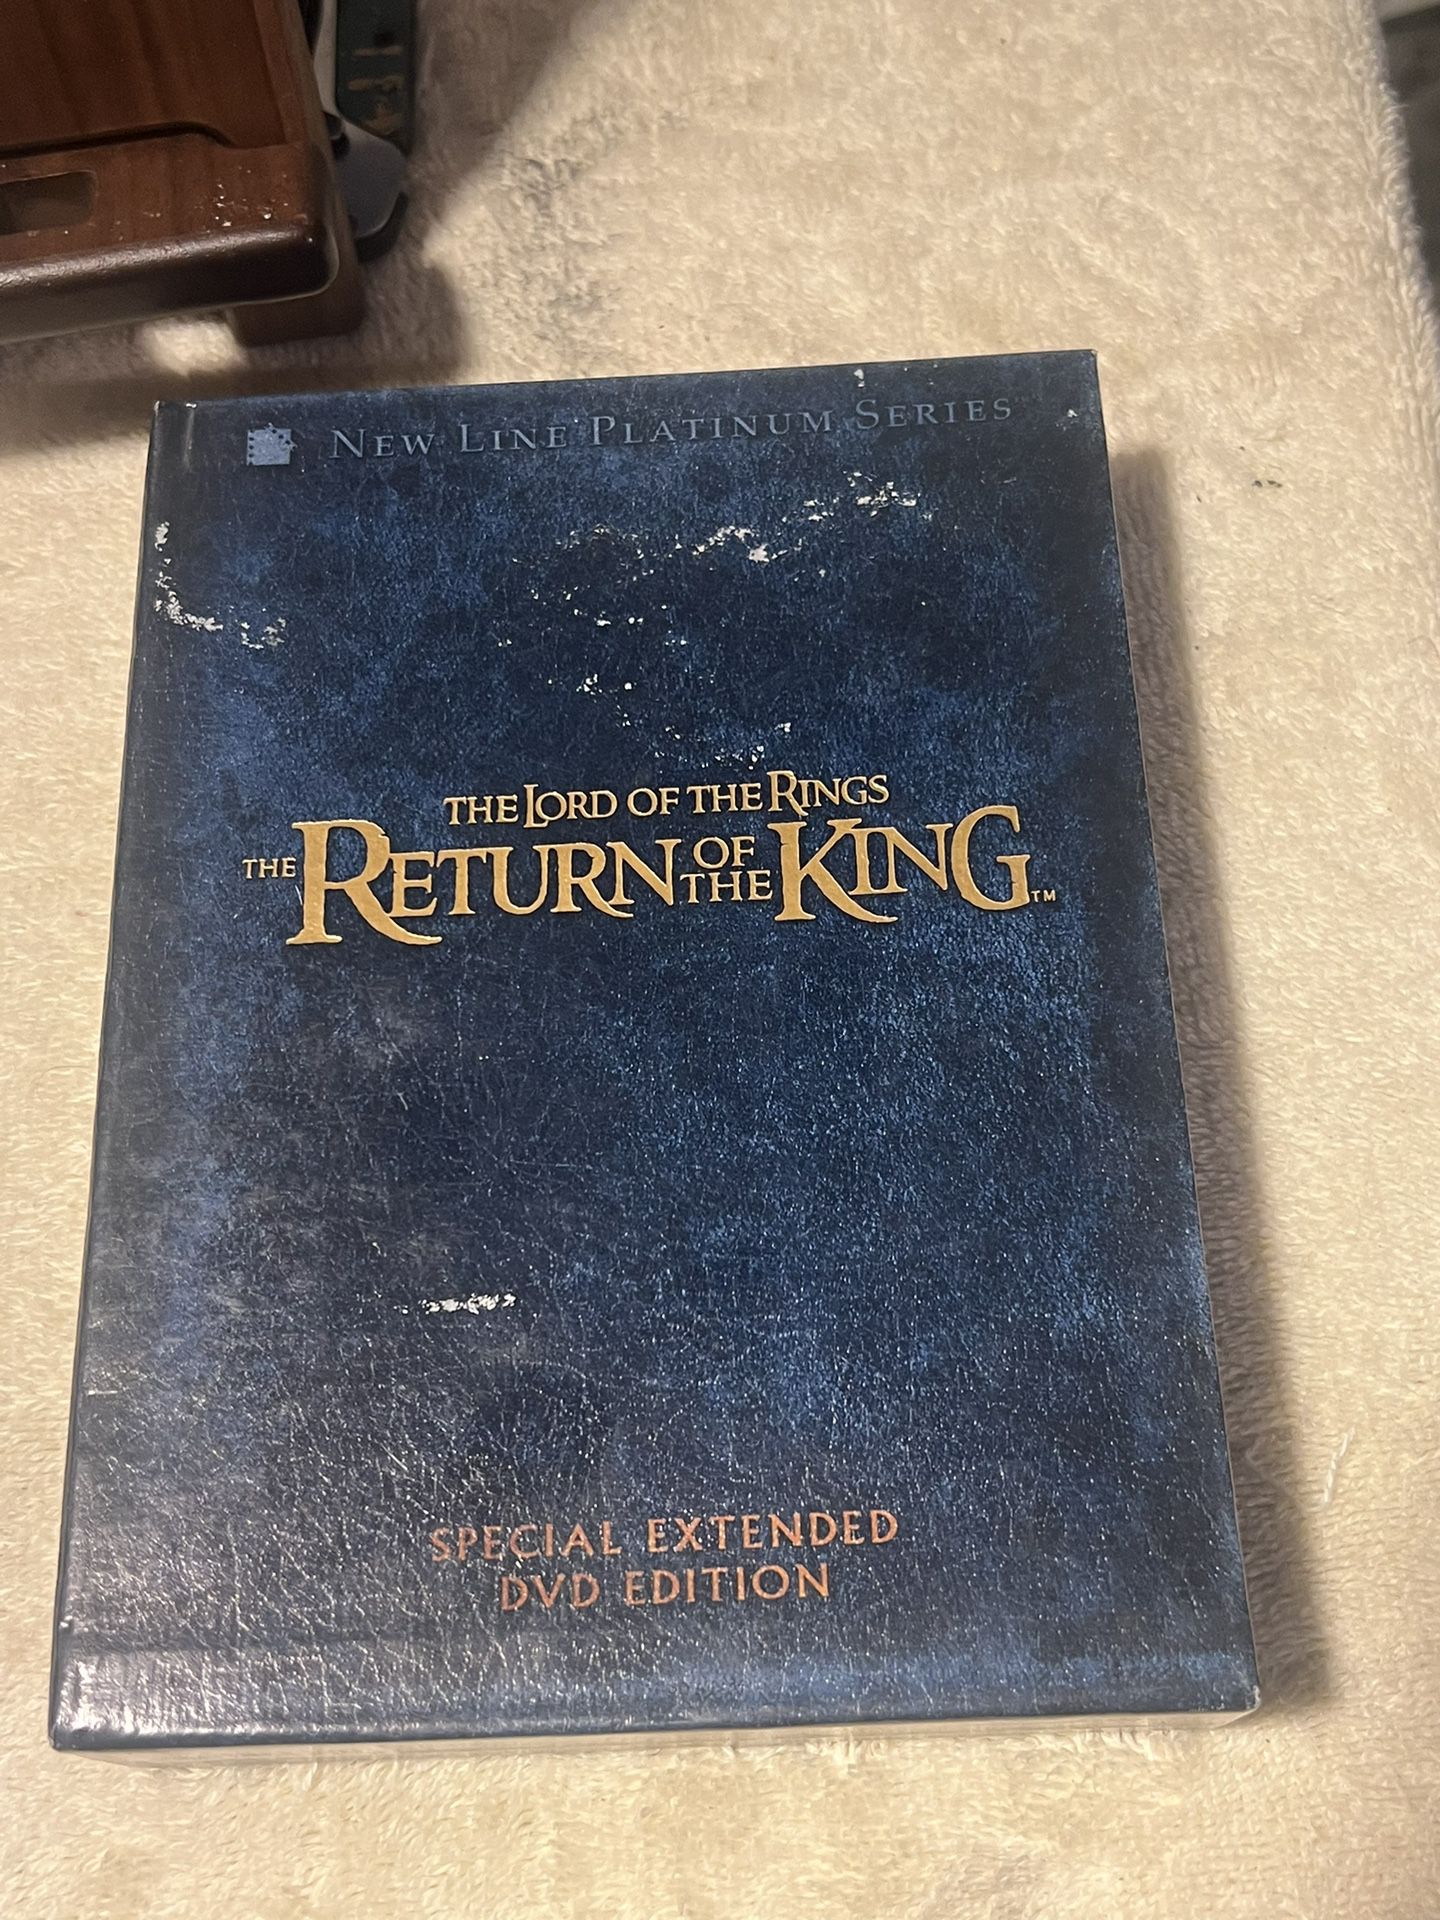 The Lord of the Rings: The Return of the King (Special Extended Edition) by New Line Home Video